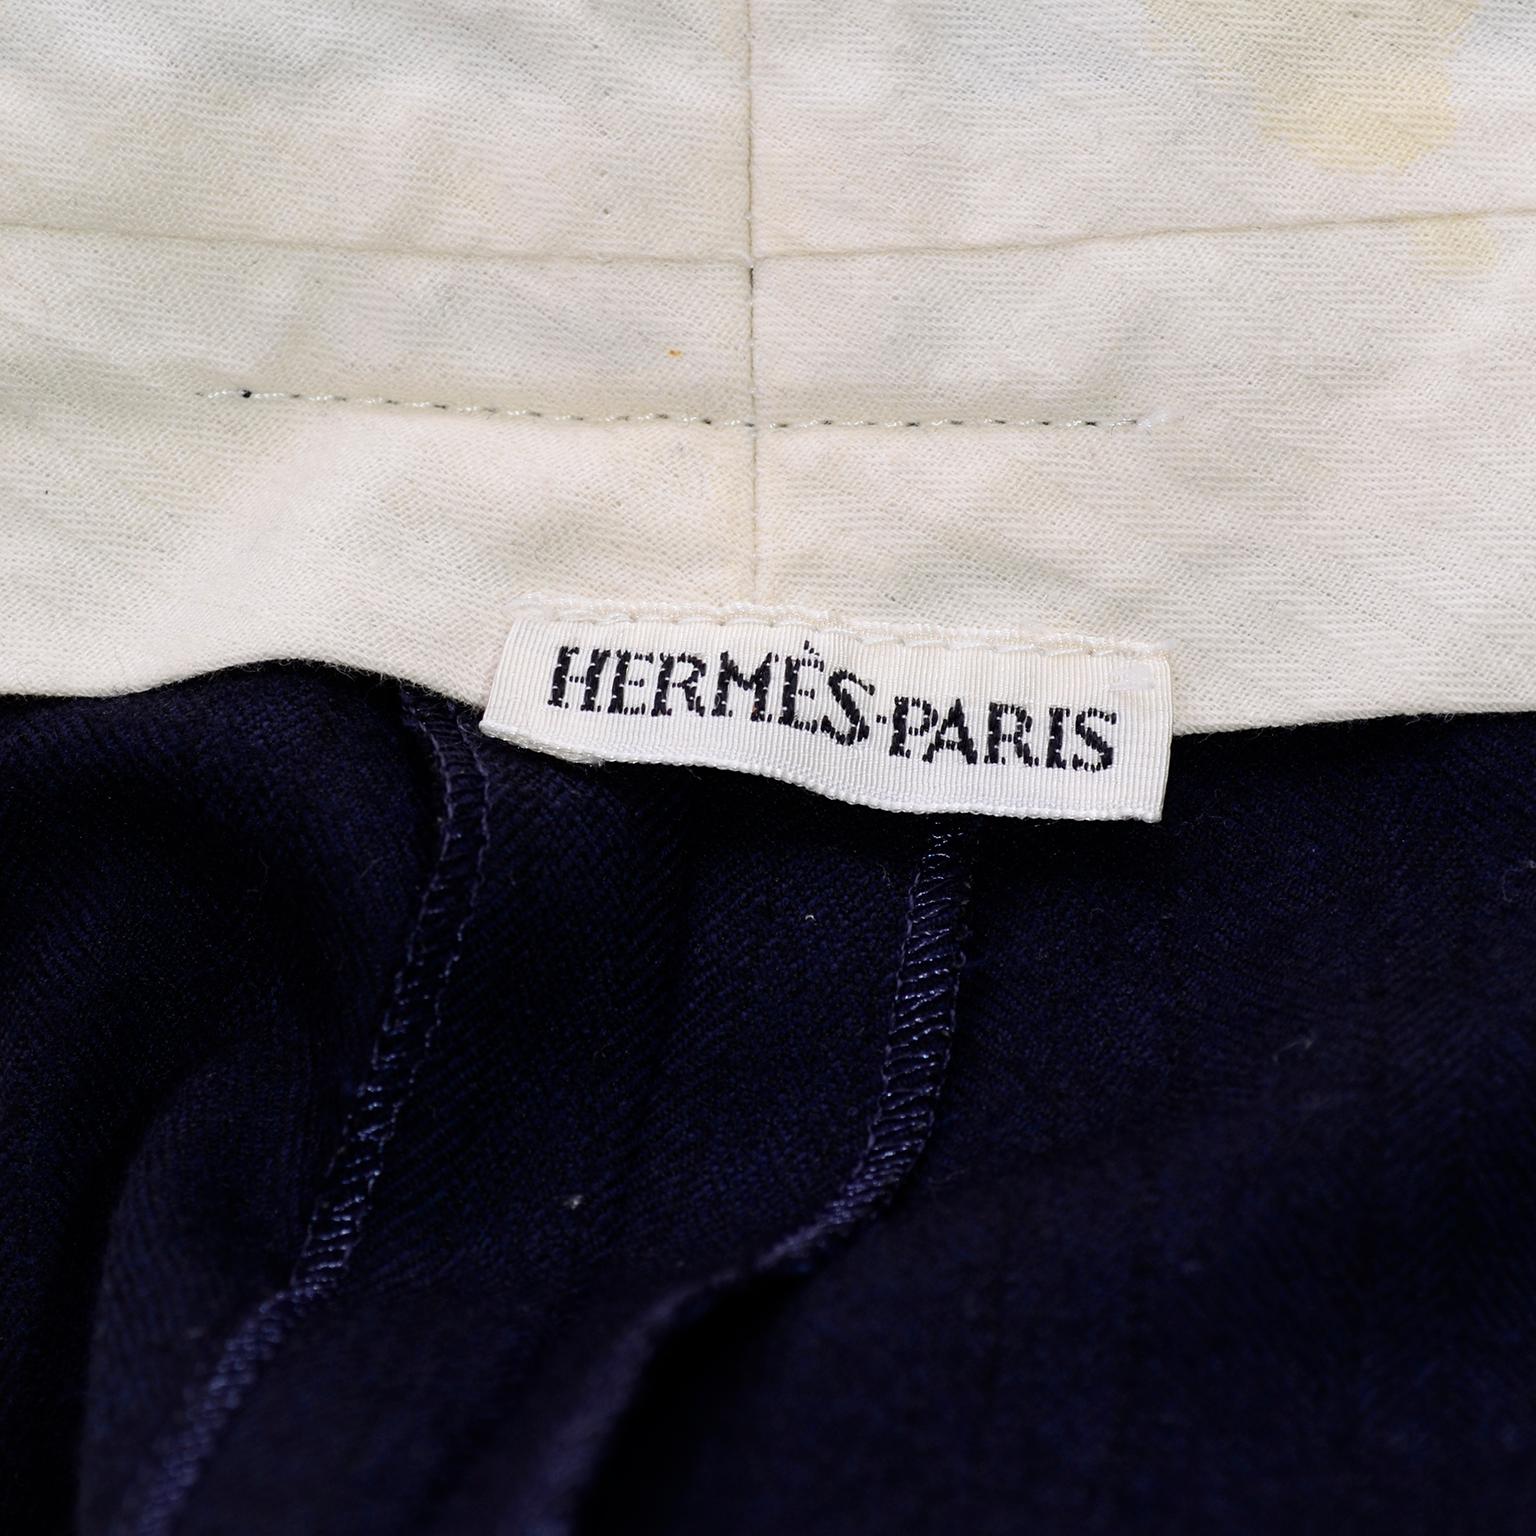 Hermes Navy Blue High Waisted Cuffed Trouser Pants Size 38 1